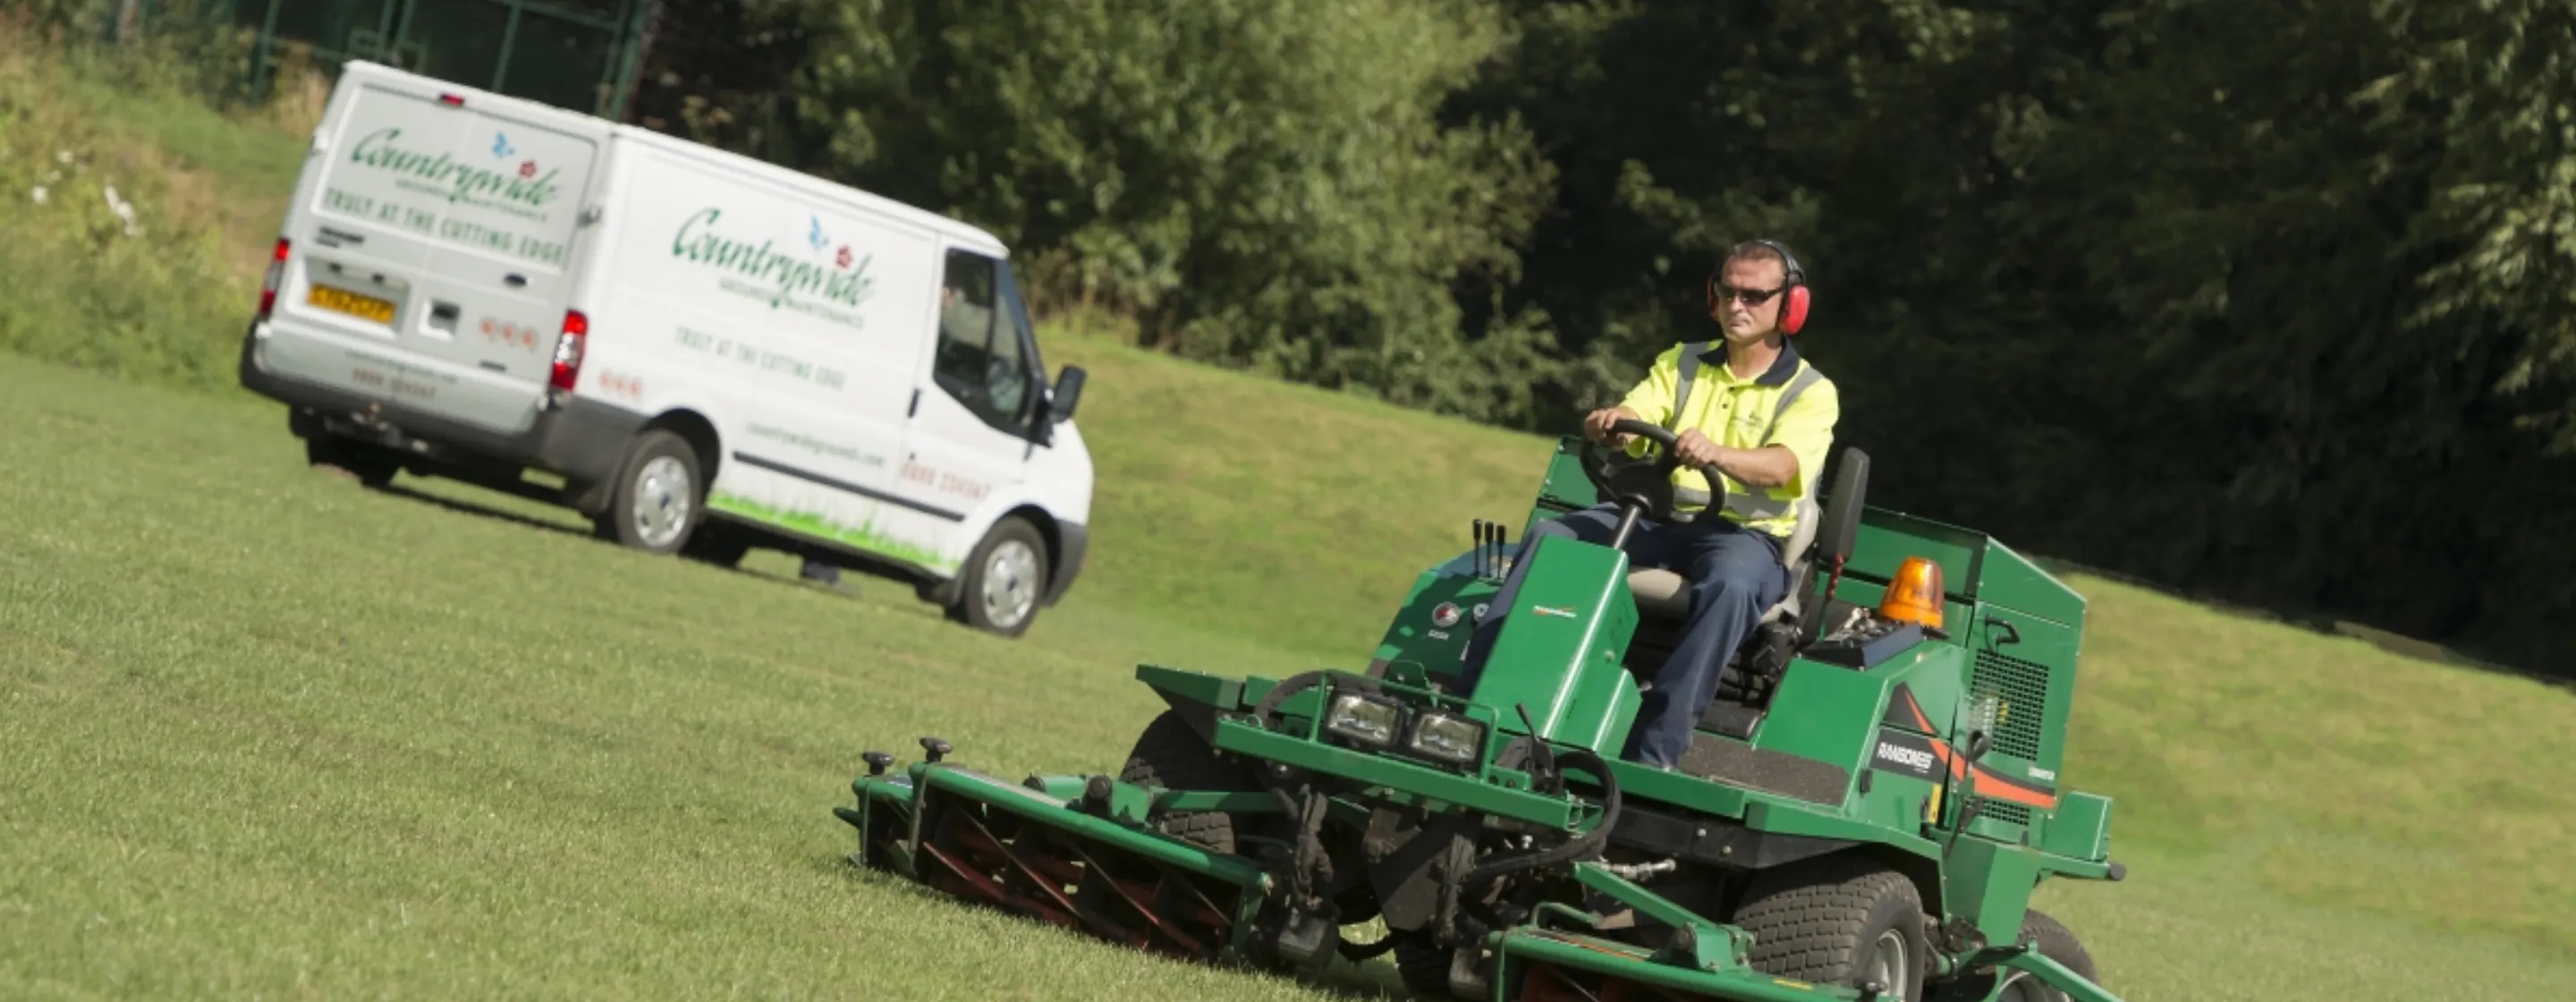 Countrywide Grounds Maintenance van and technician riding a lawn mower.